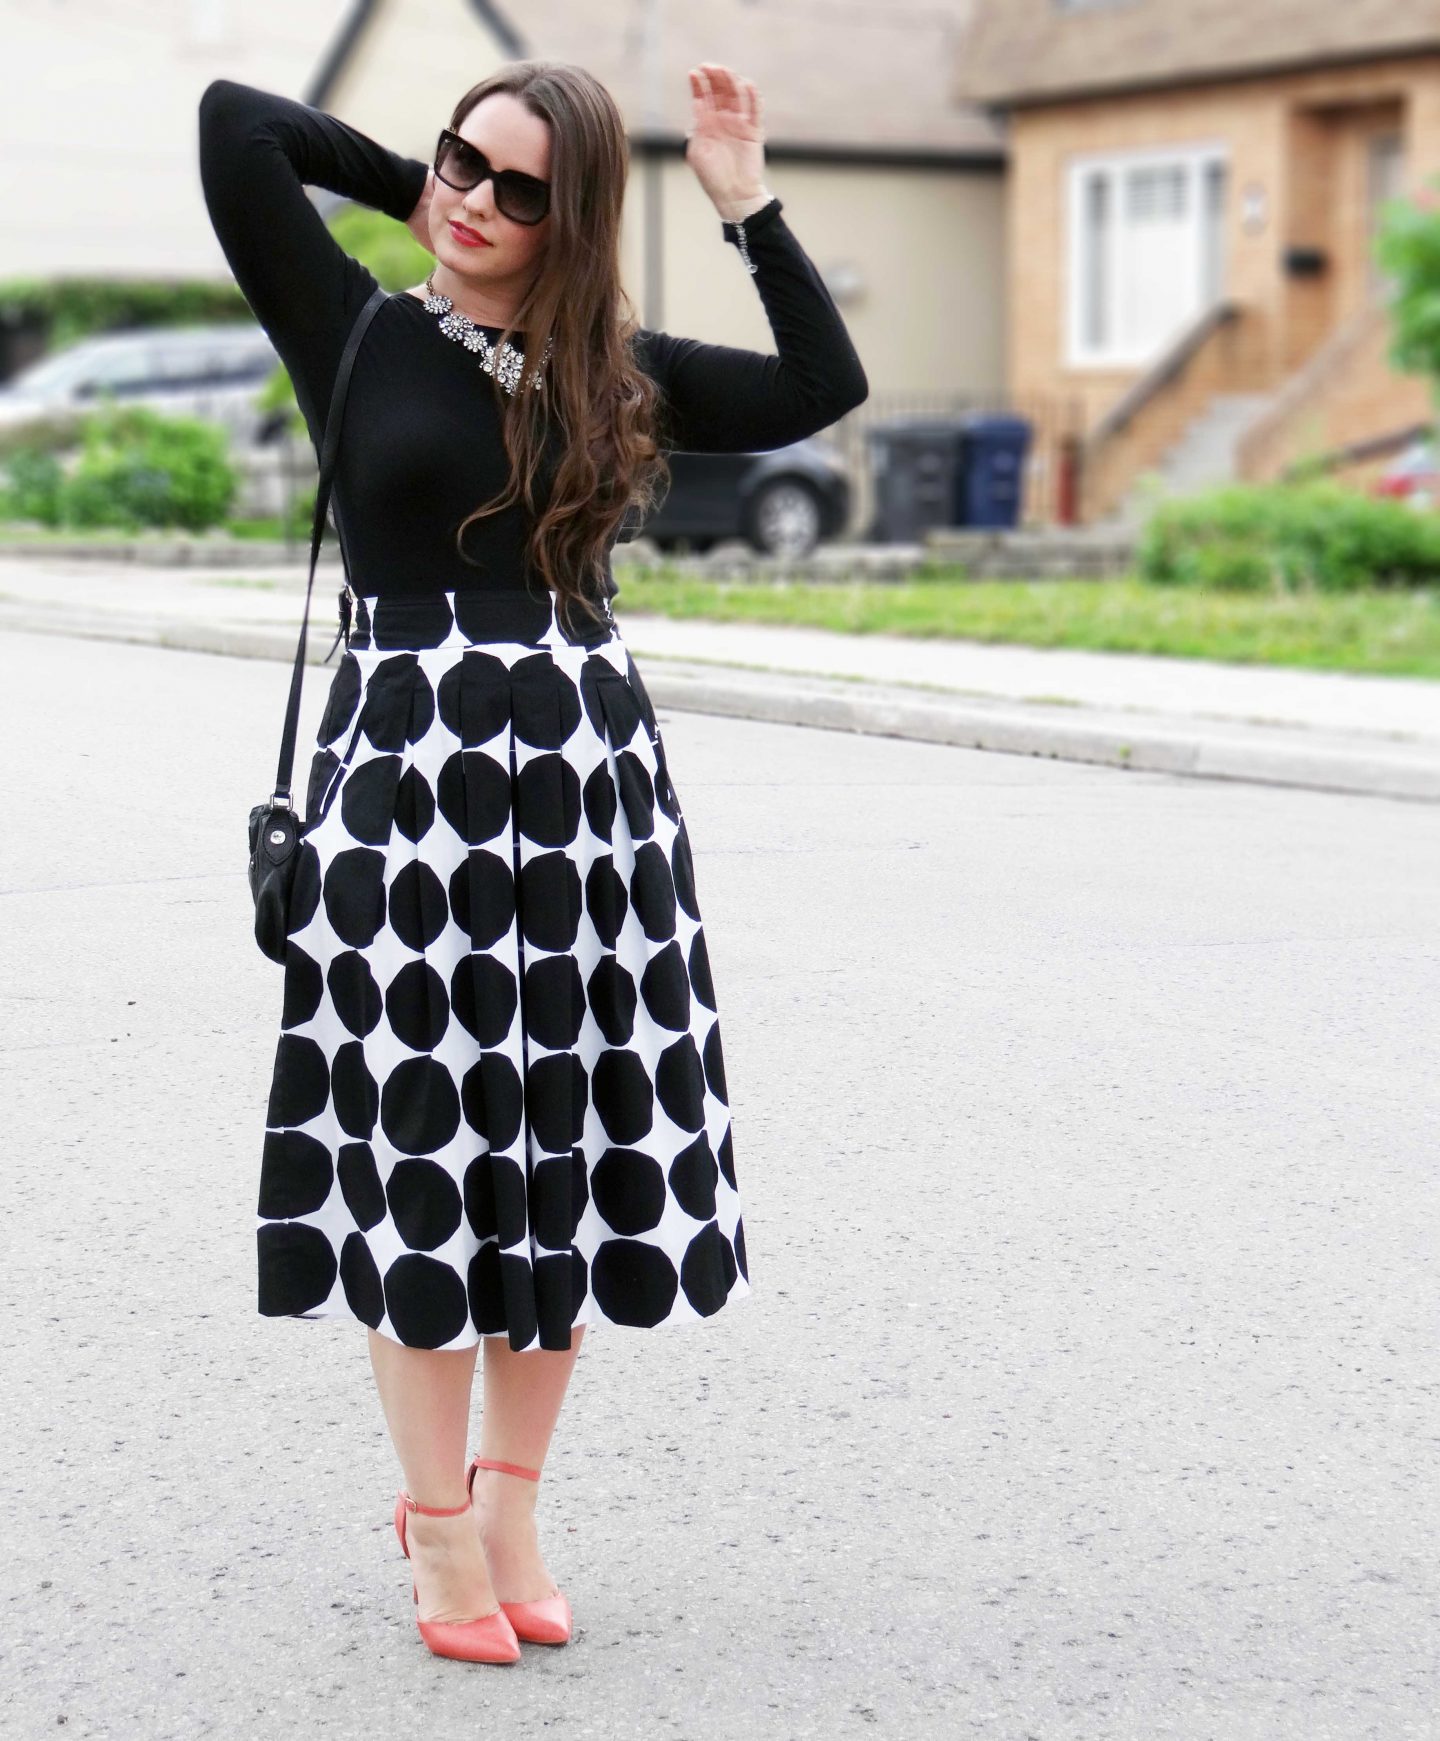 Canadian_Fashion_Style_Blogger_Victoria_Simpson_Toronto - A Side Of Style